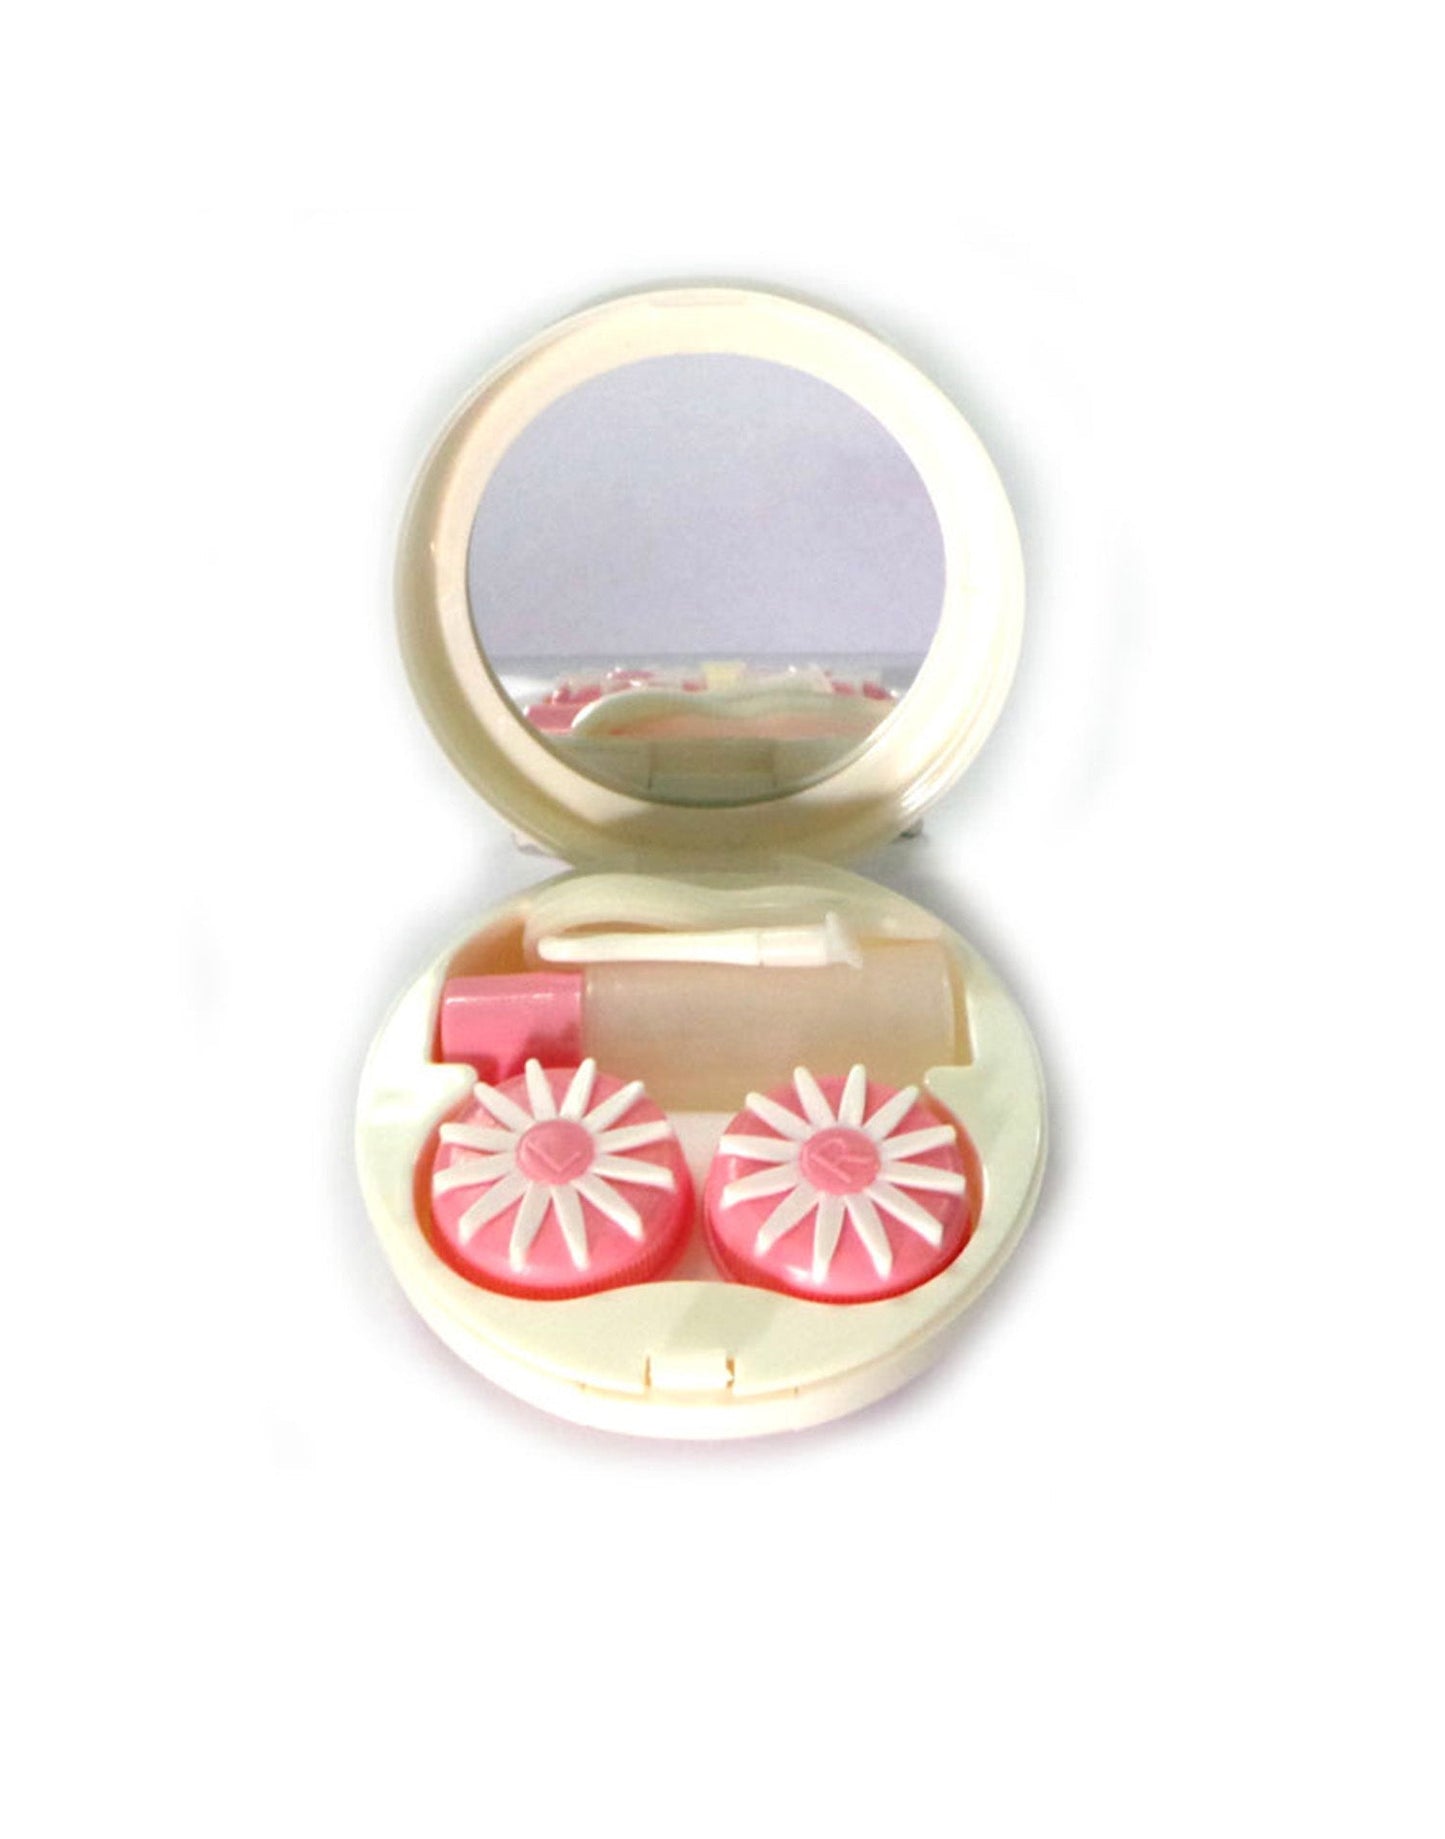 BUTTERFLY EFFECT - Designer Contact Lens Cases - A8063A-PK ARCADIO